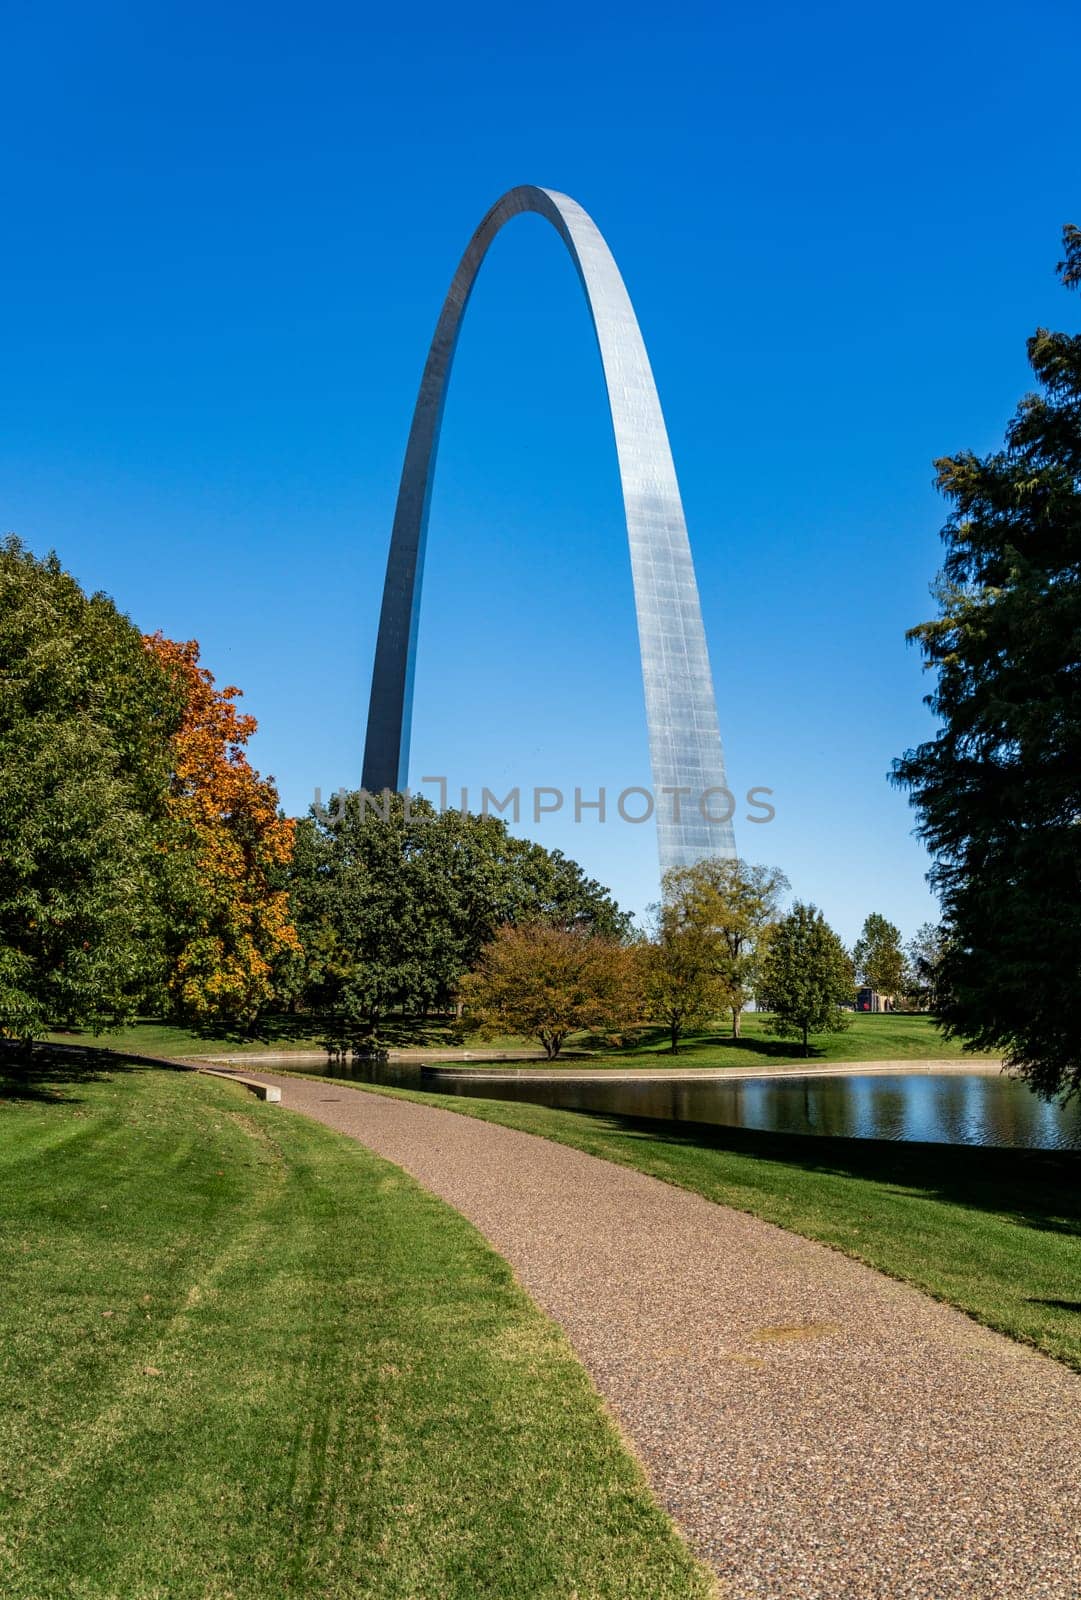 Gateway Arch of St Louis Missouri from the park and lake by steheap